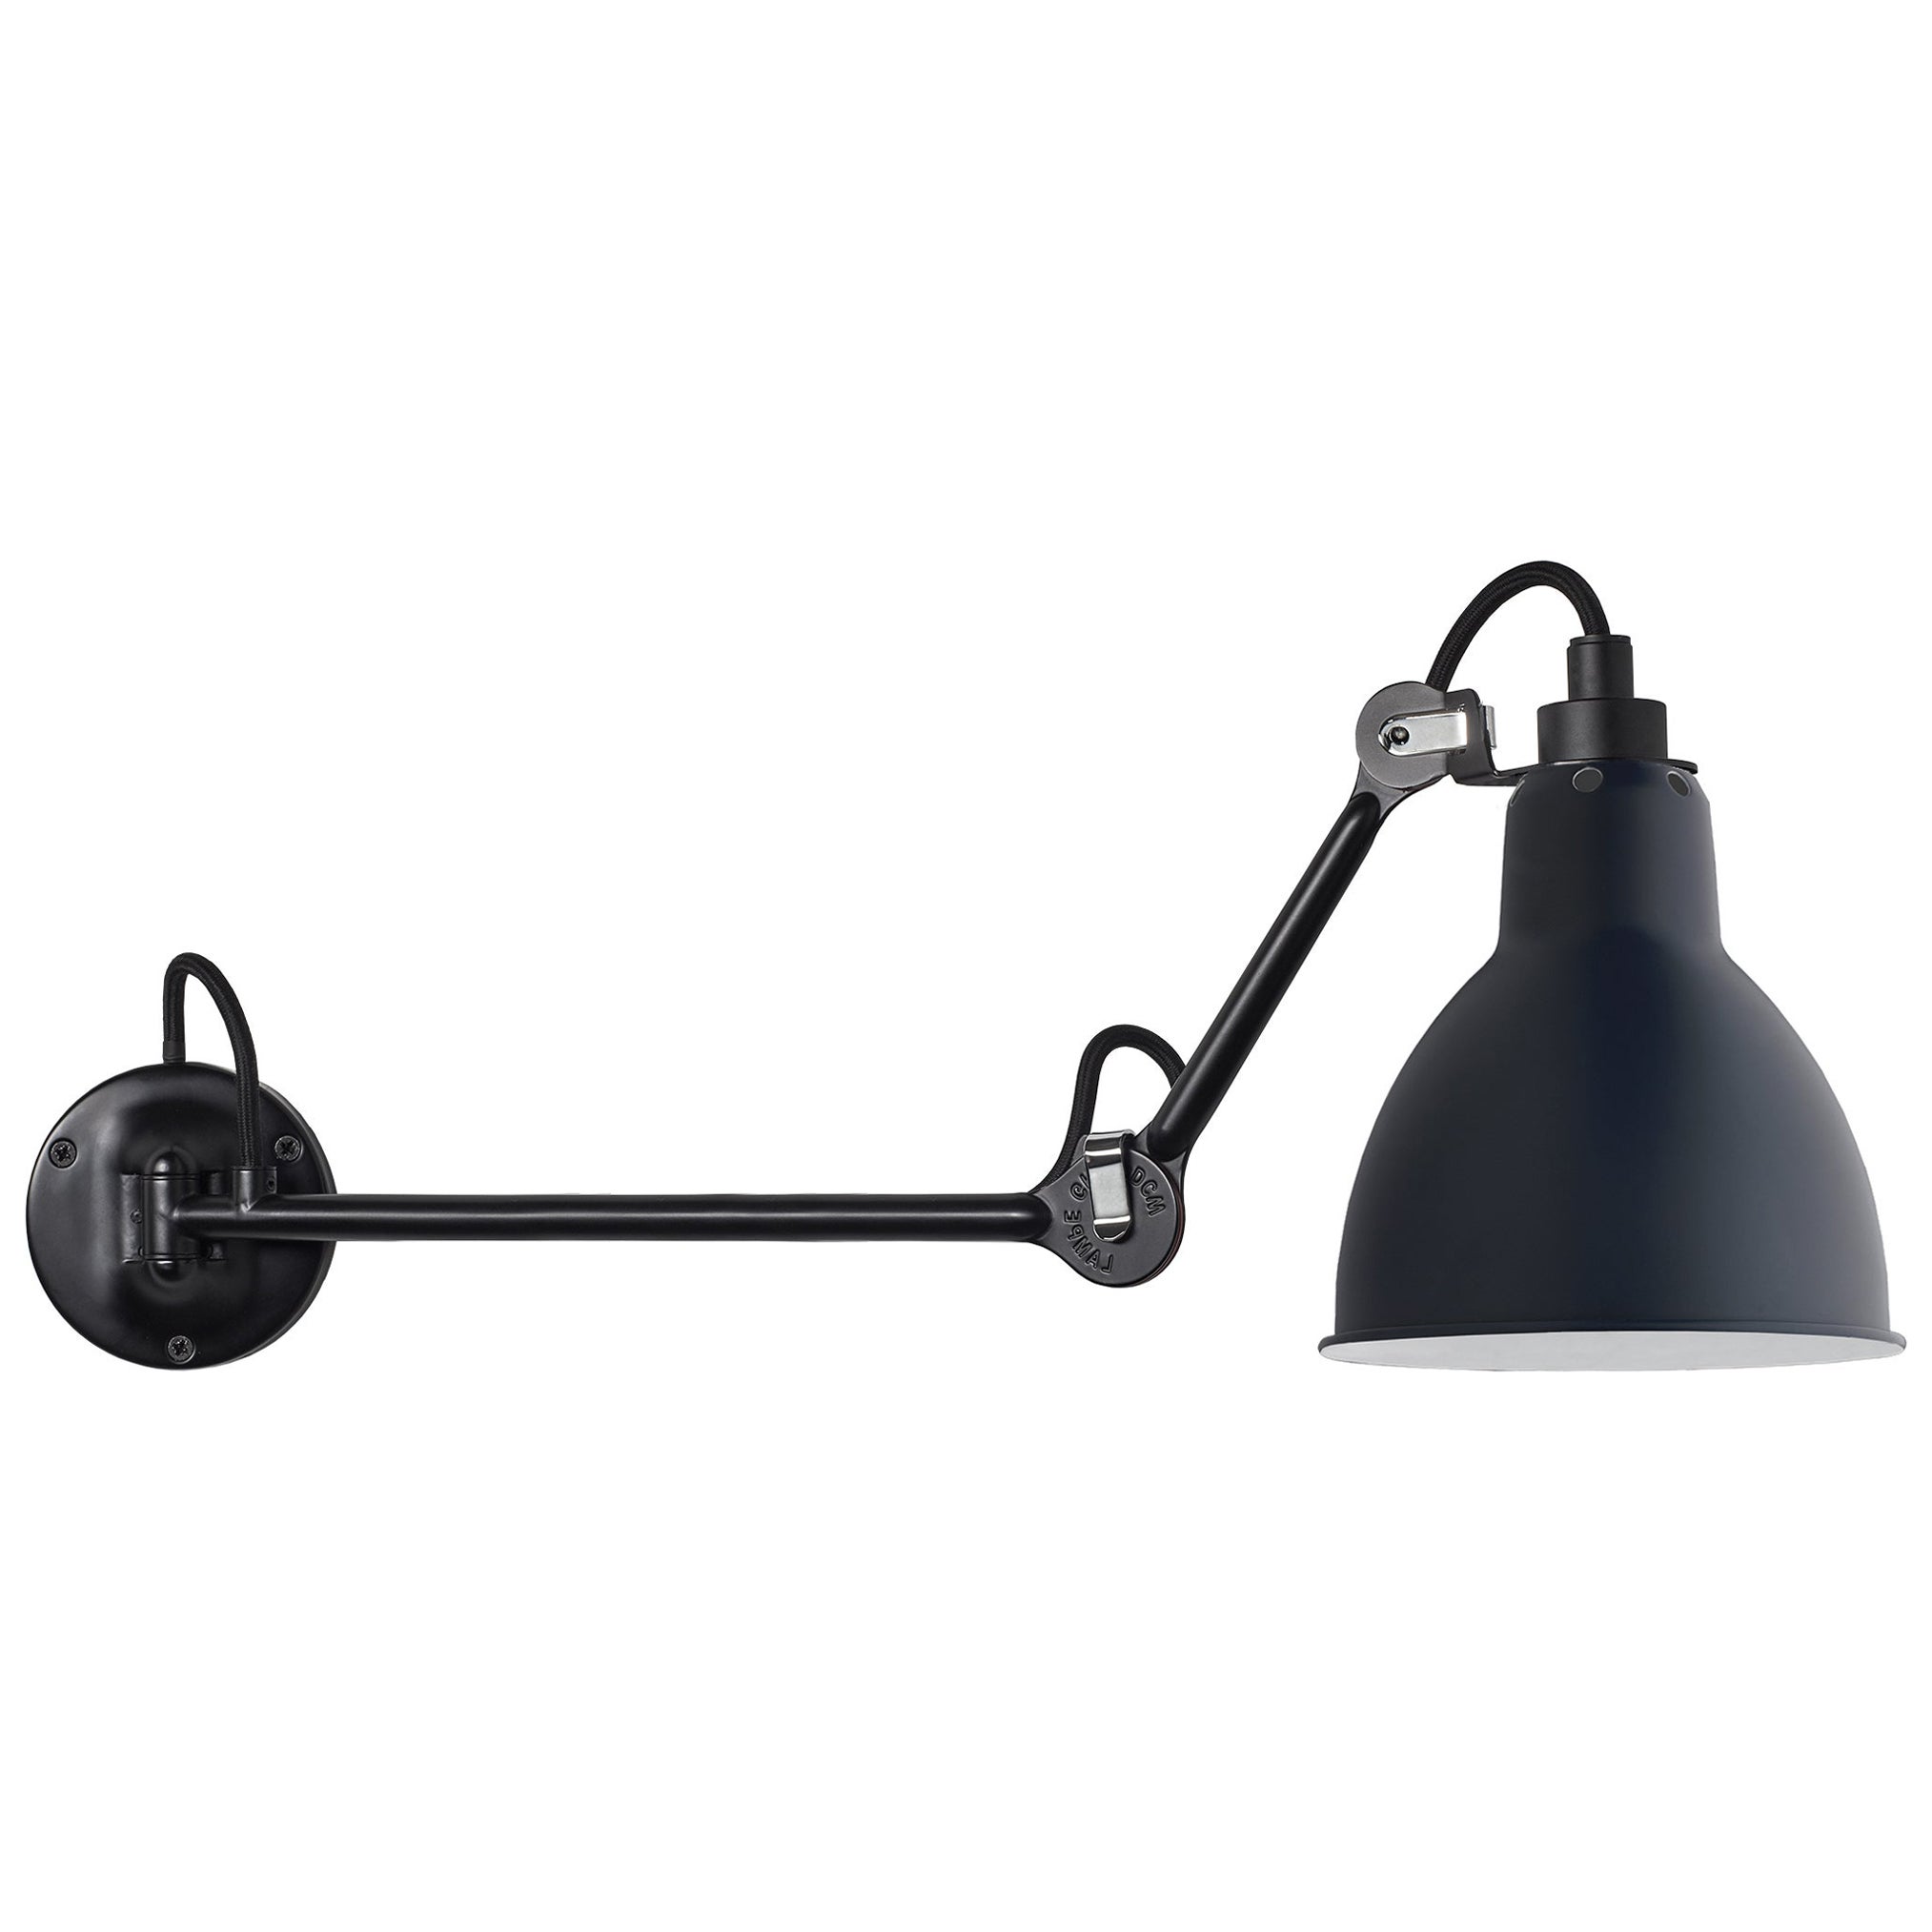 DCW Editions La Lampe Gras N°204 L40 Wall Lamp in Black Steel Arm and Blue Shade For Sale